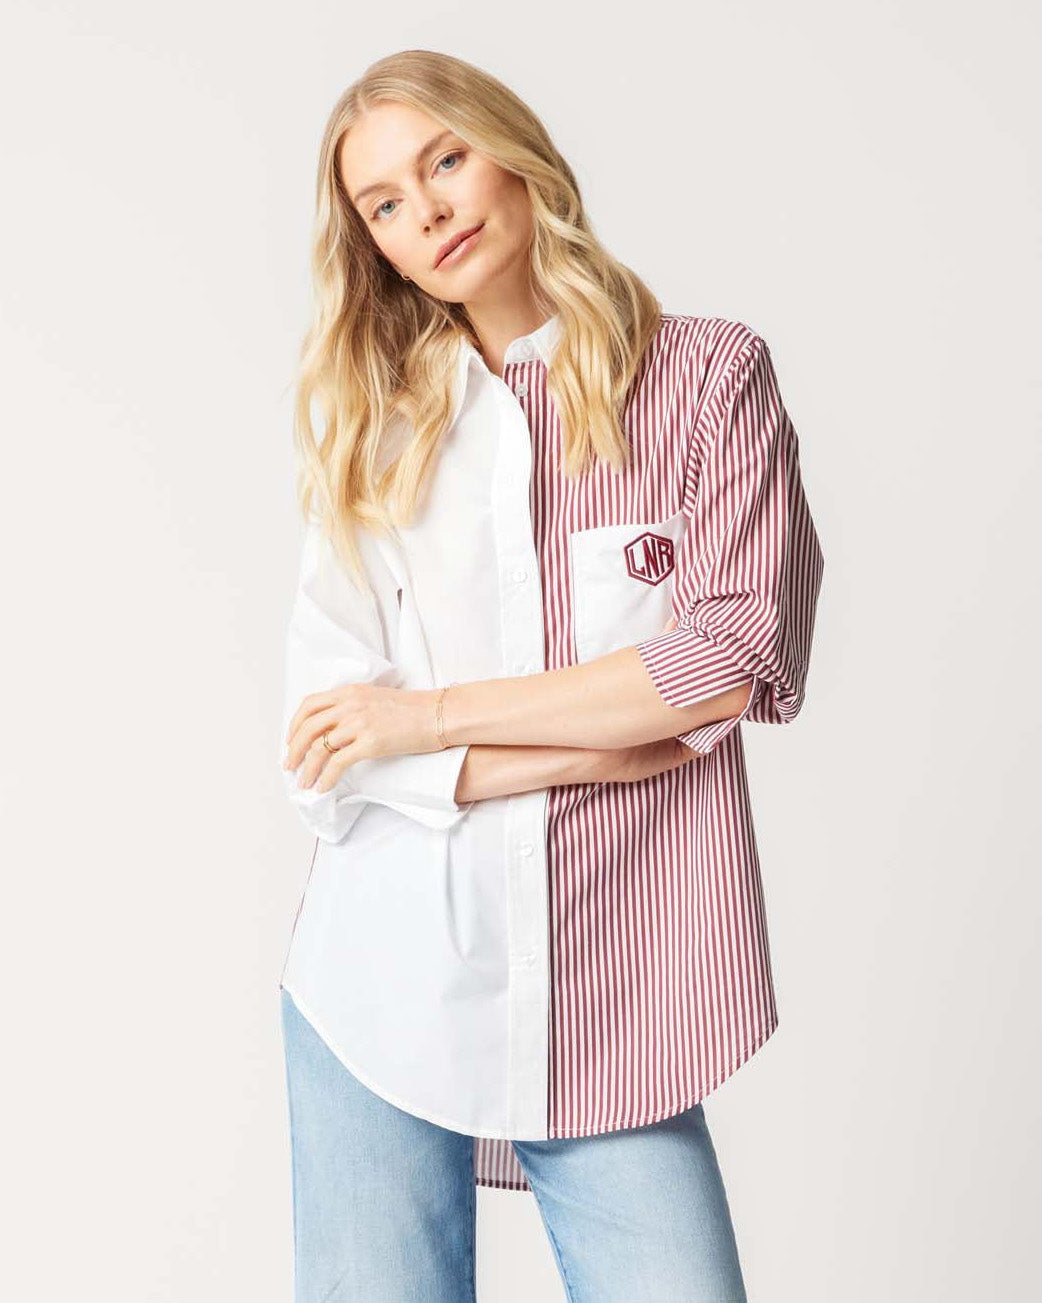 Top Maroon / XS/S The Brooklyn Button Down Katie Kime